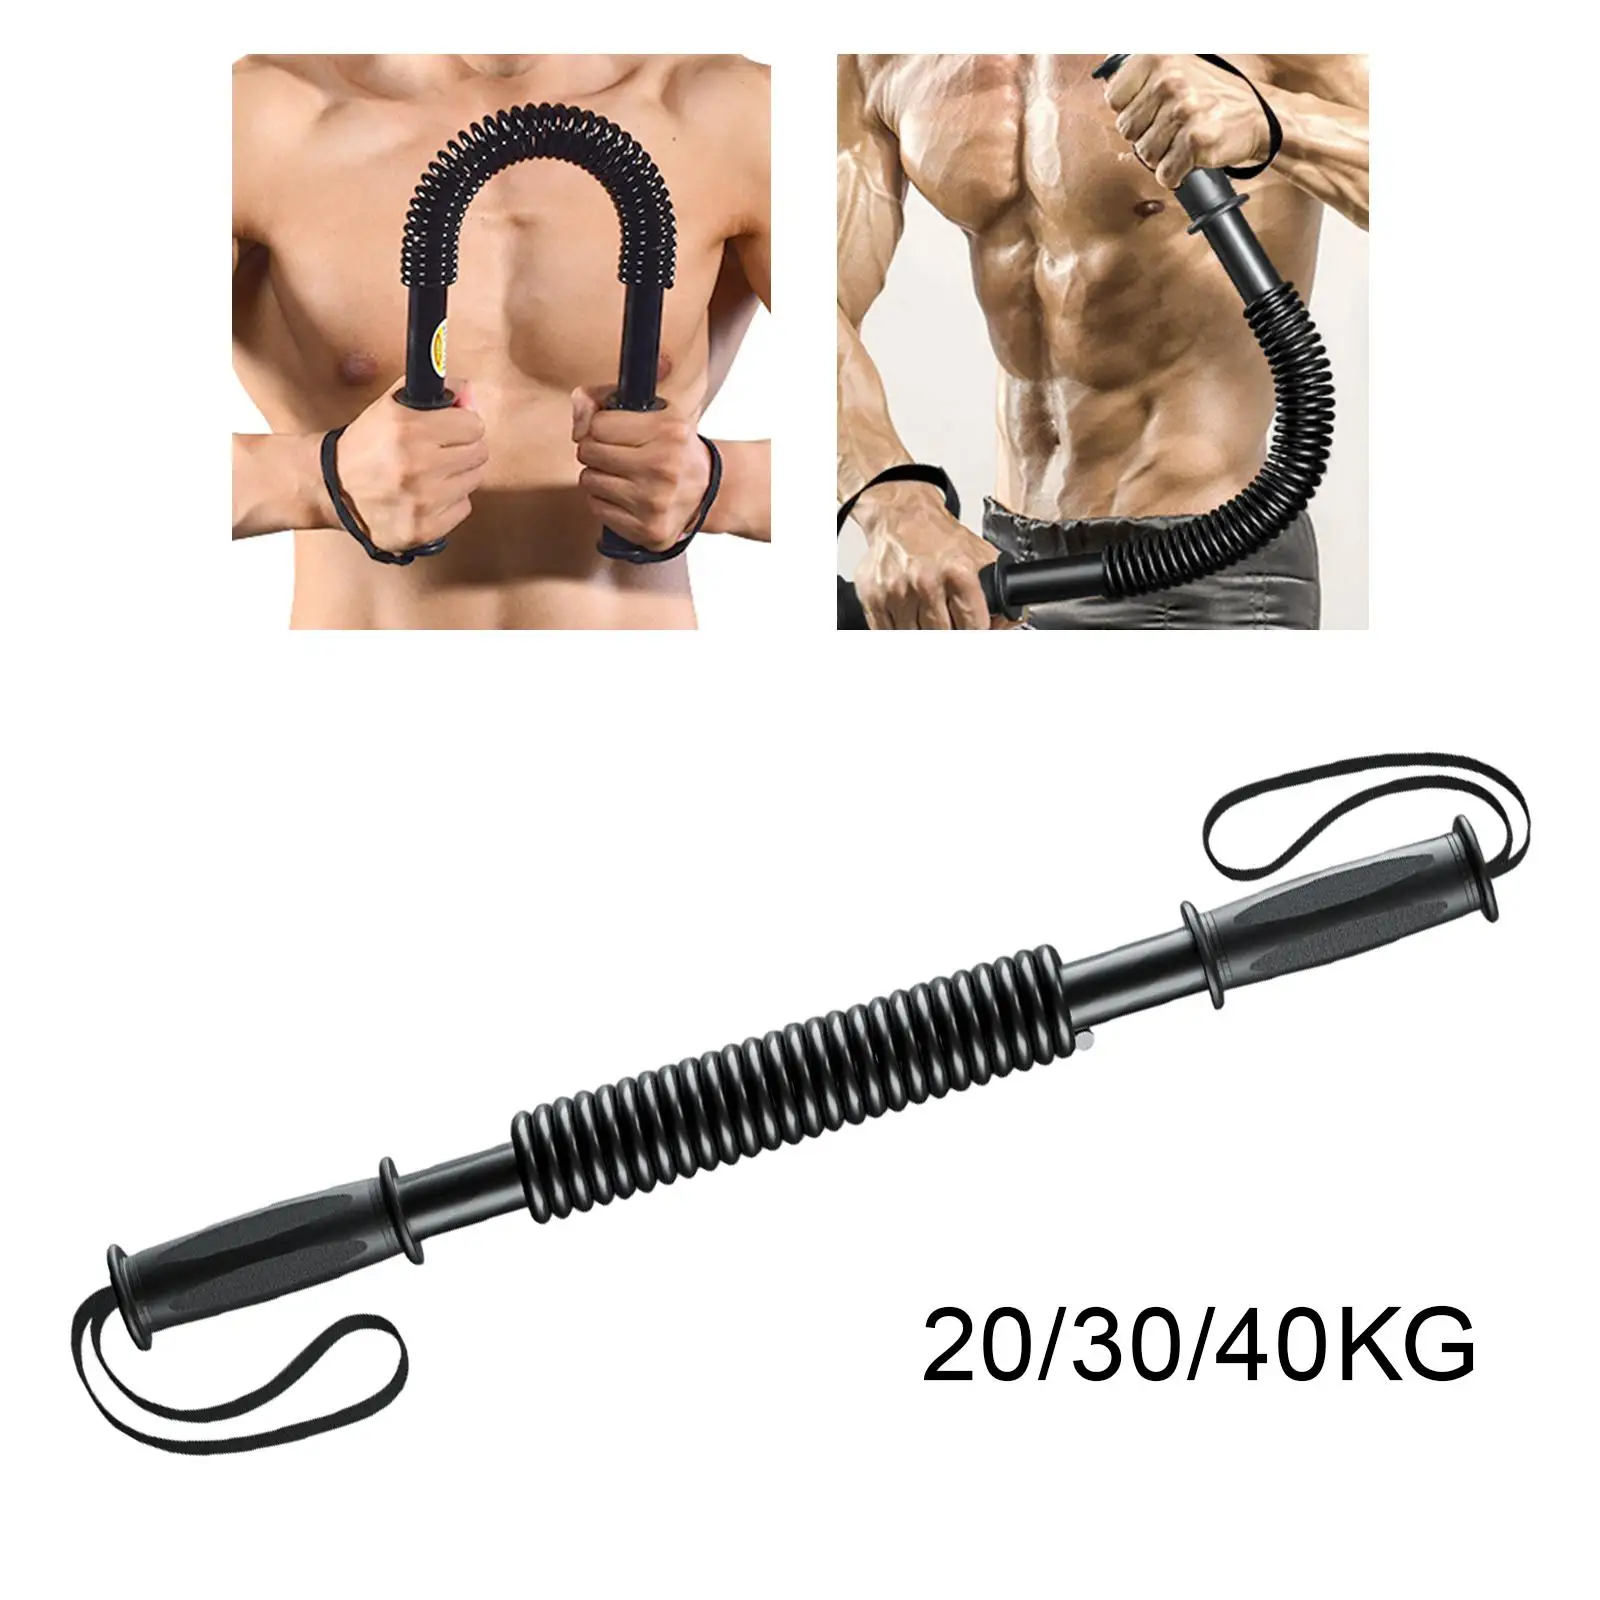 Upper Body Exercise Workout Equipment Chest Expander Power Twister Bar for Muscle Training Women Men Shoulder Bicep Home Gym